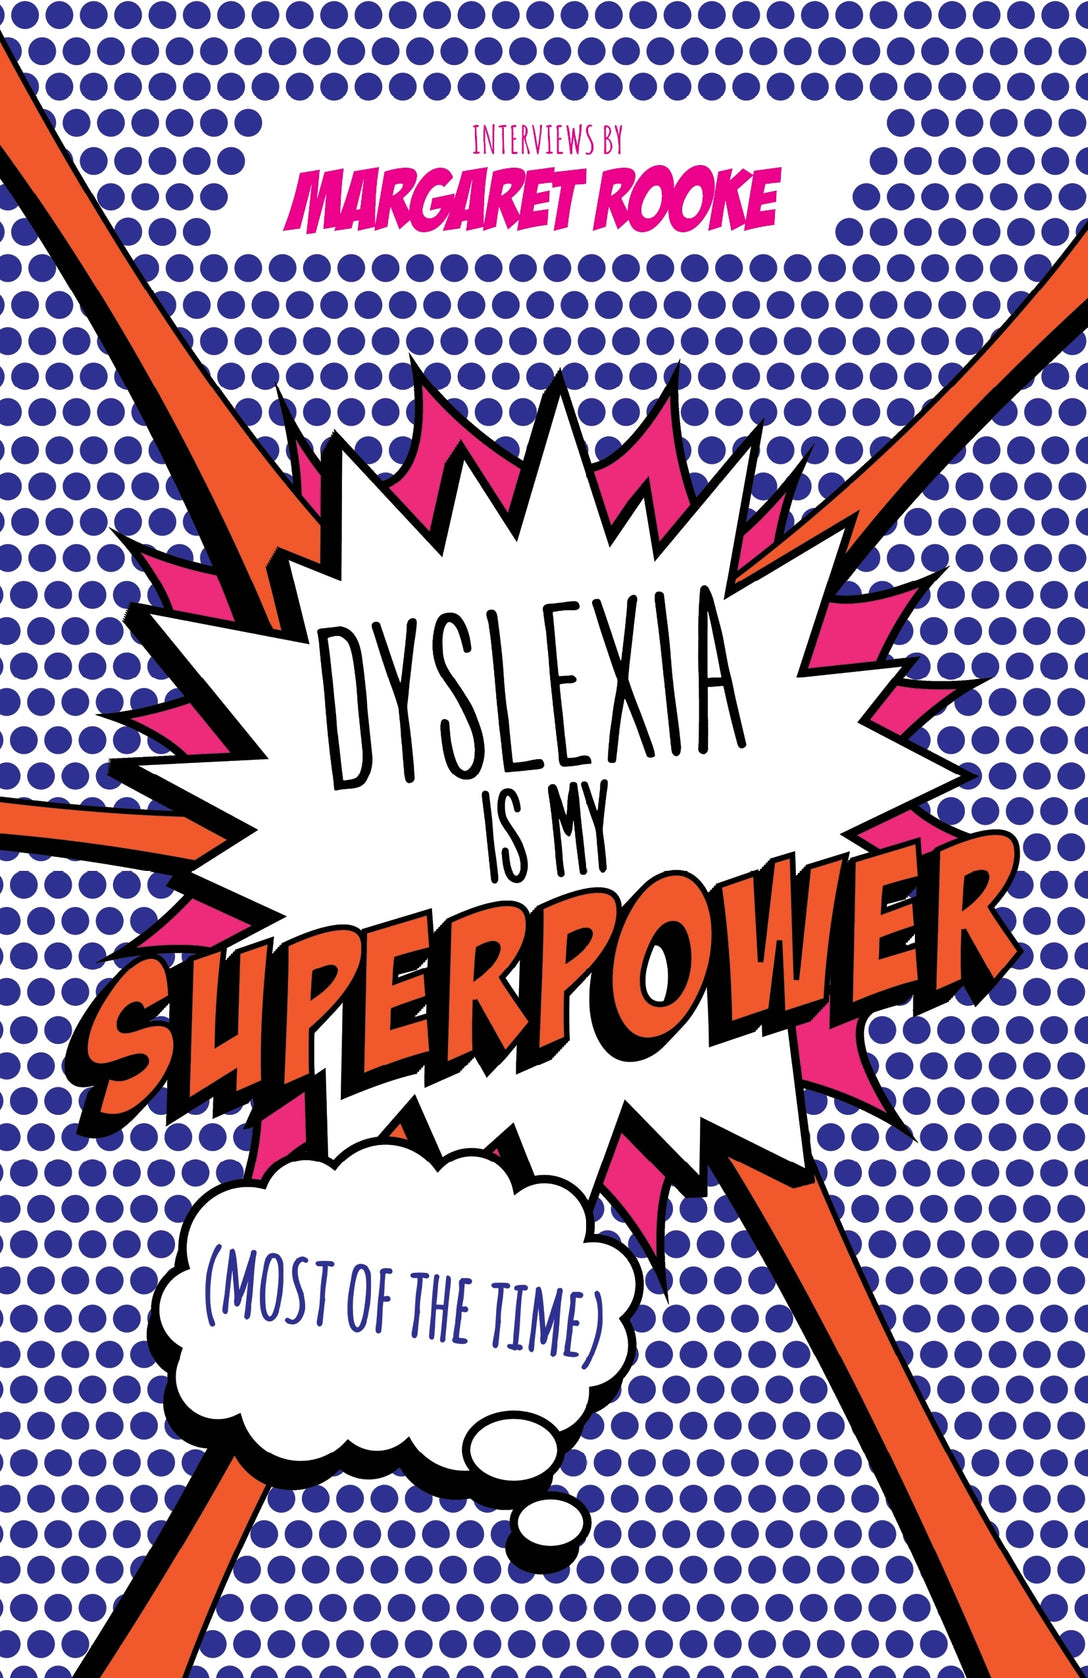 Dyslexia is My Superpower (Most of the Time) by Margaret Rooke, Catherine Drennan, Loyle Carner